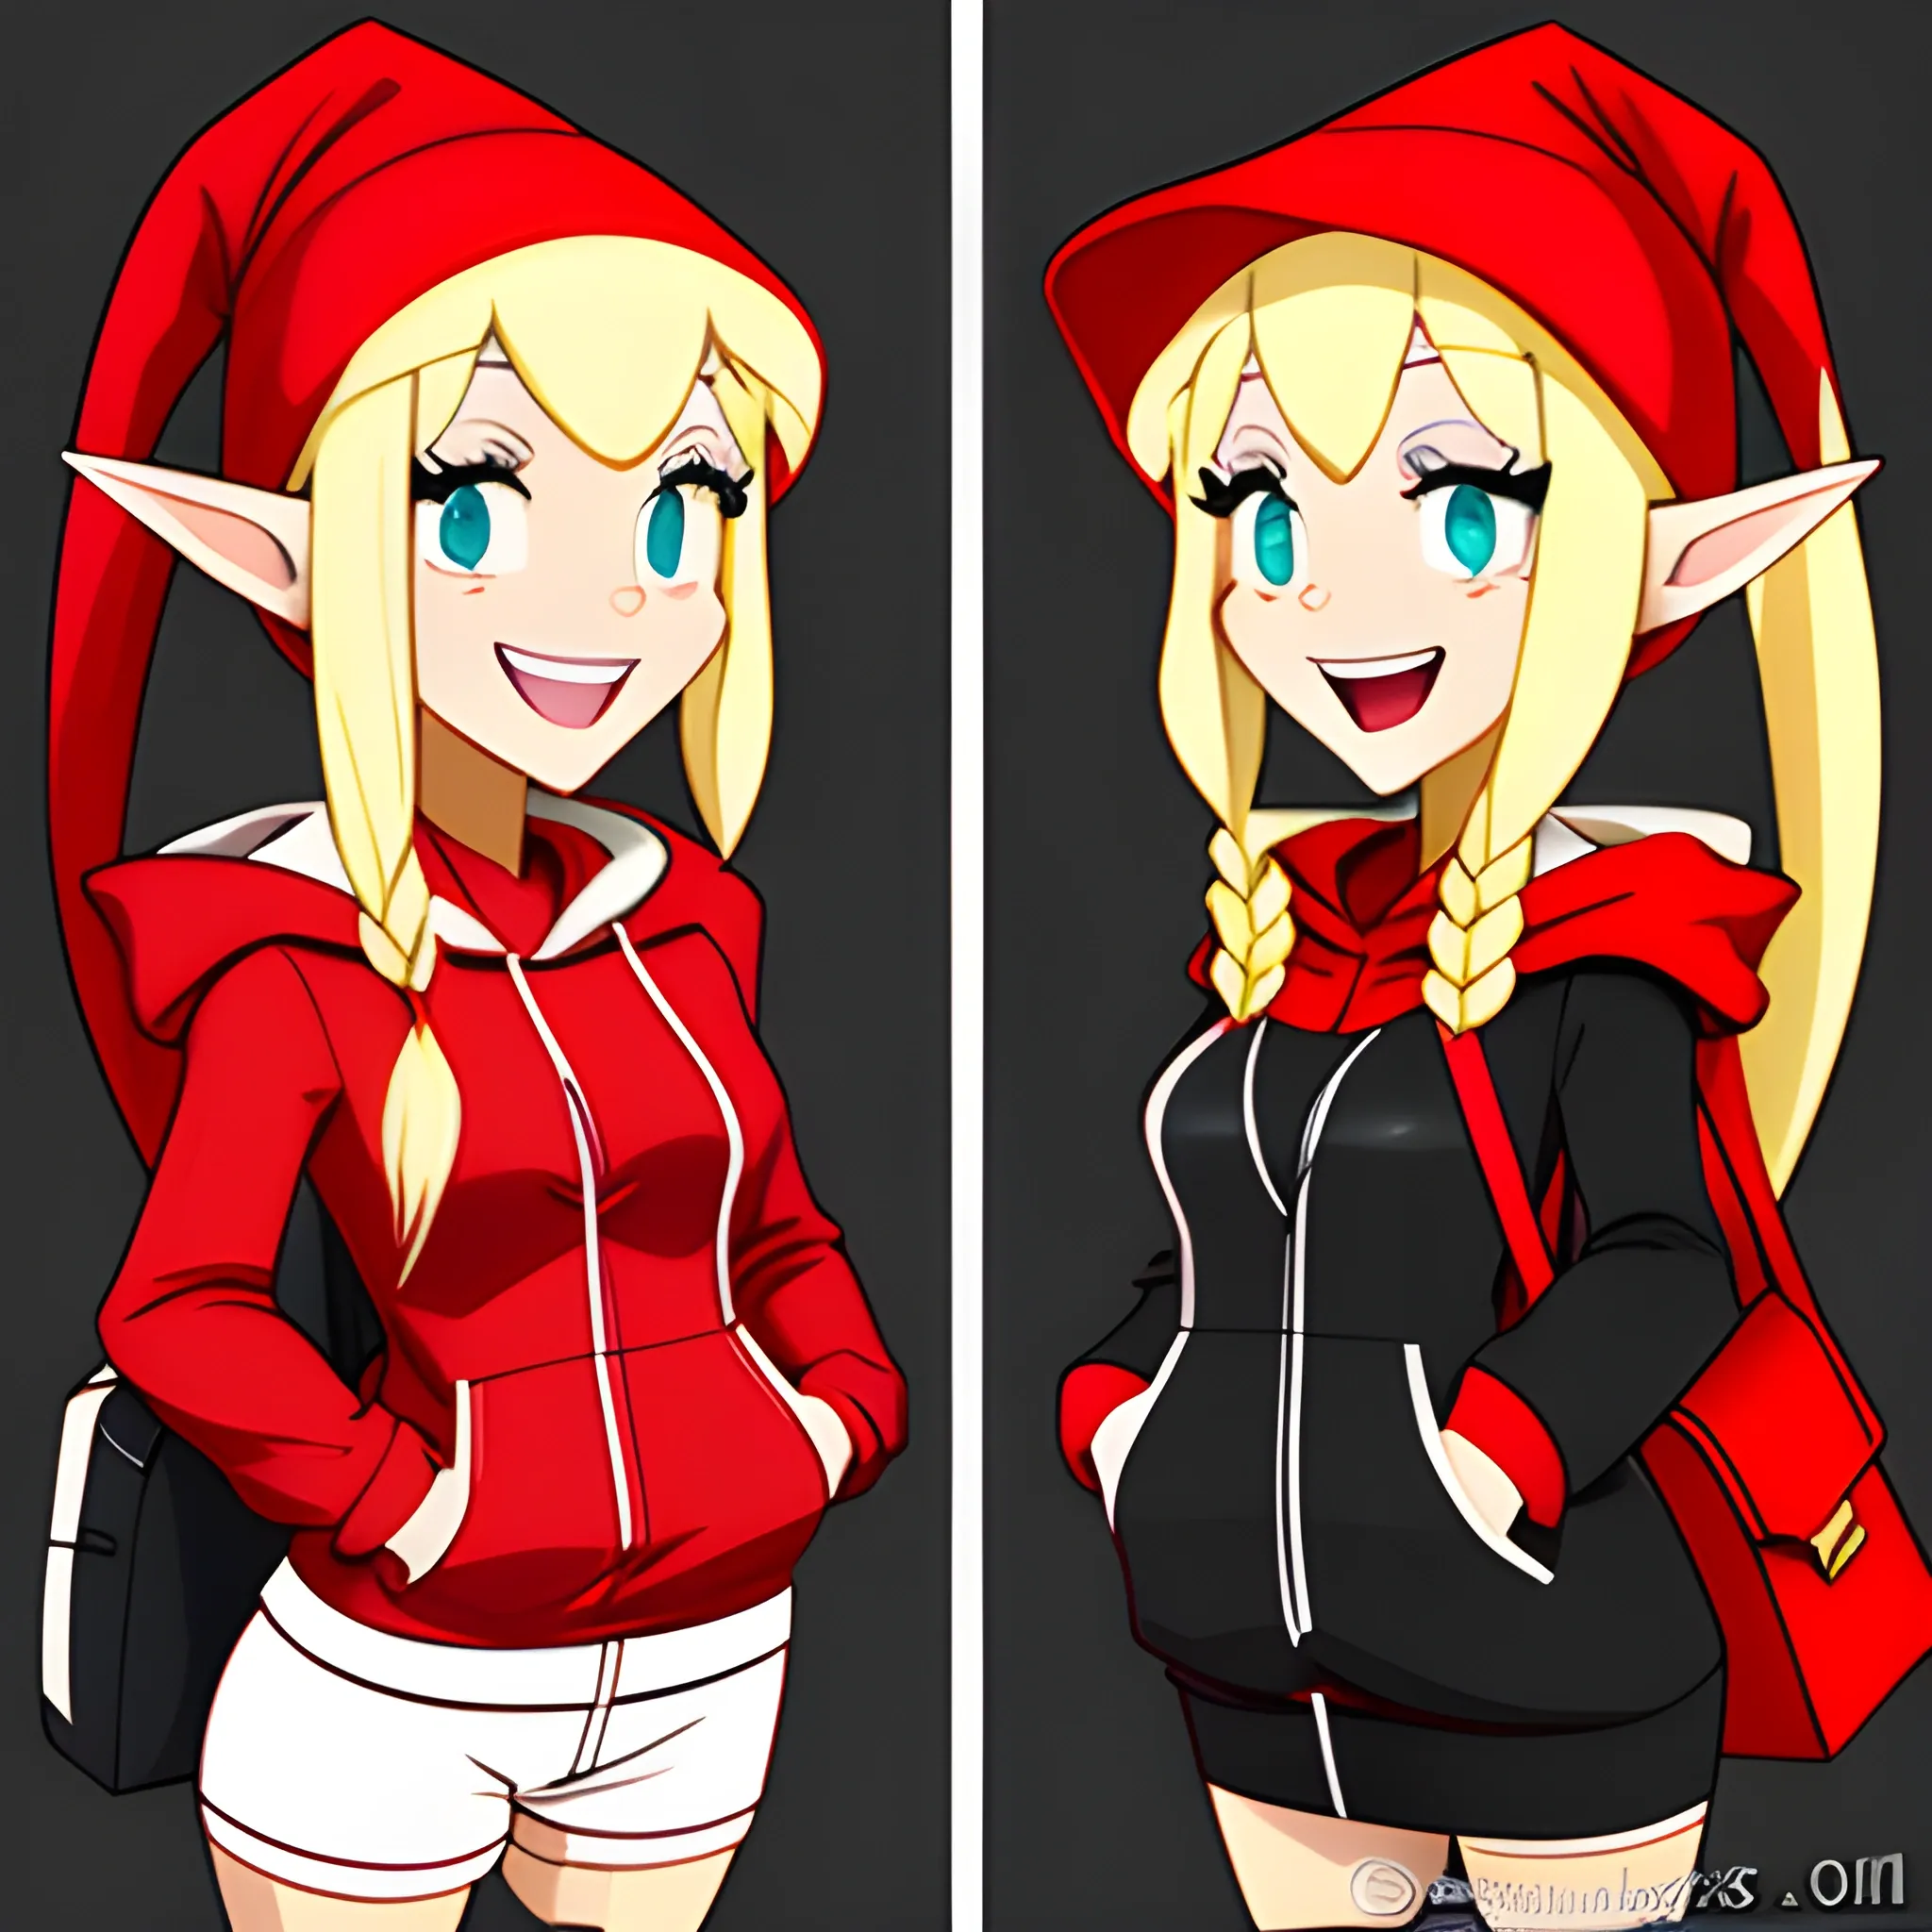  have elf ears,girl,double ponytail hair,red hat and hooded clothes and red schoolbag,happy expression, Cartoon, Cartoon,very cute,blond hair